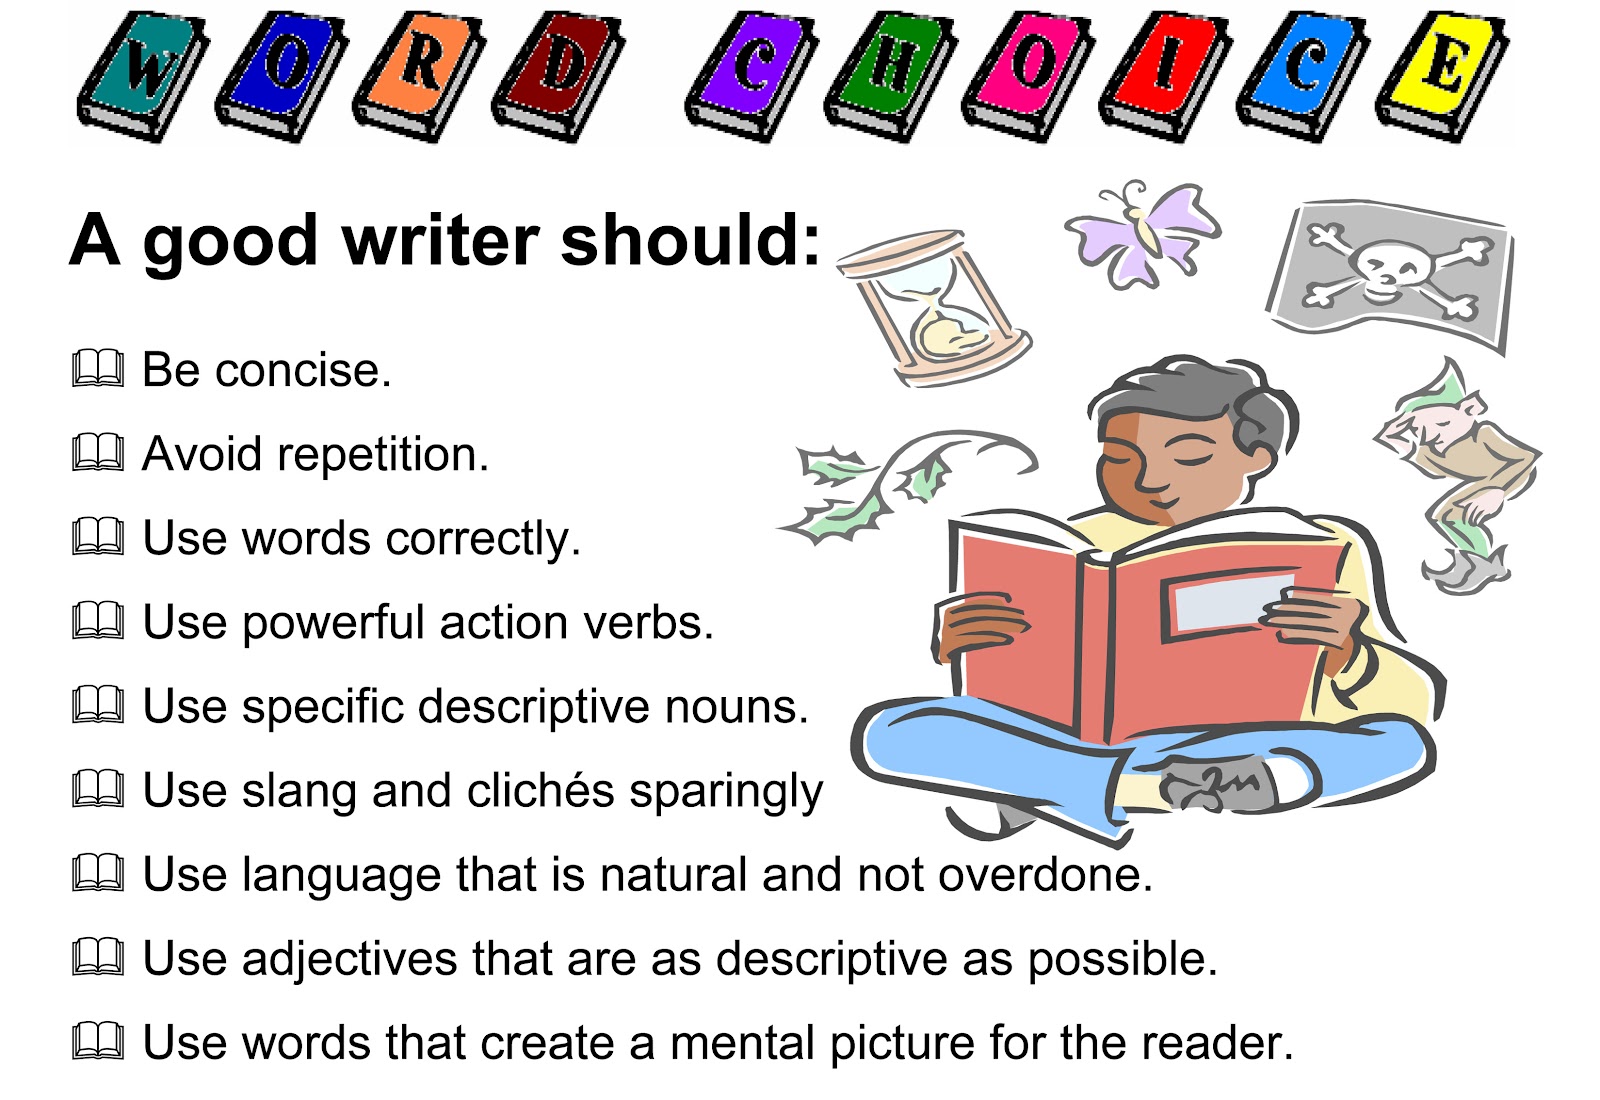 6 they write books. Writing 4. Descriptive writing for Kids. Workshop for writers. Word choice.